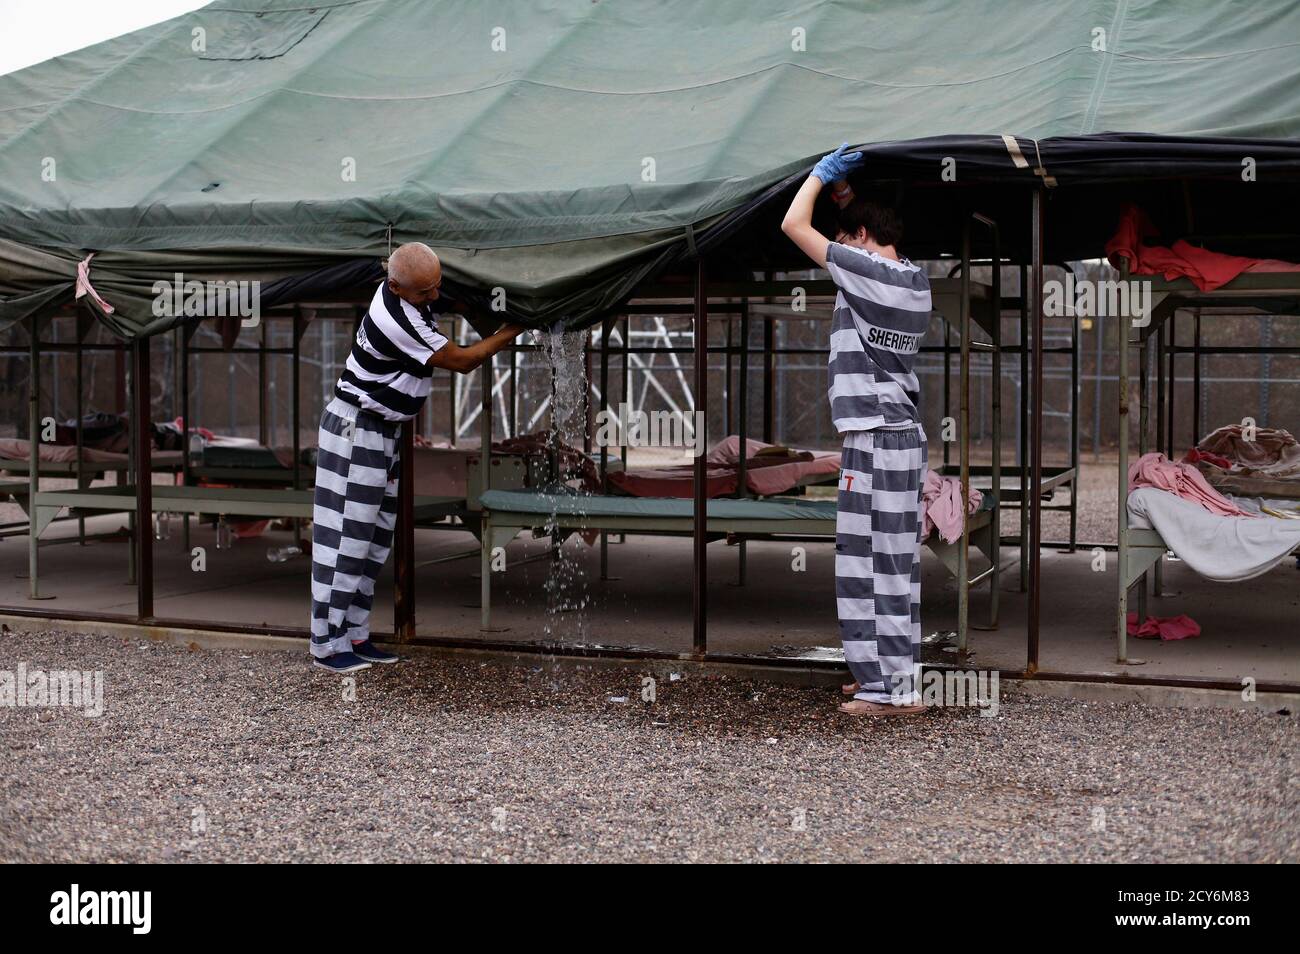 Inmates serving time at Maricopa County's Tent City jail remove water from  a tent in Phoenix, Arizona August 22, 2012. The controversial jail is run  by Maricopa County Sheriff Joe Arpaio, who